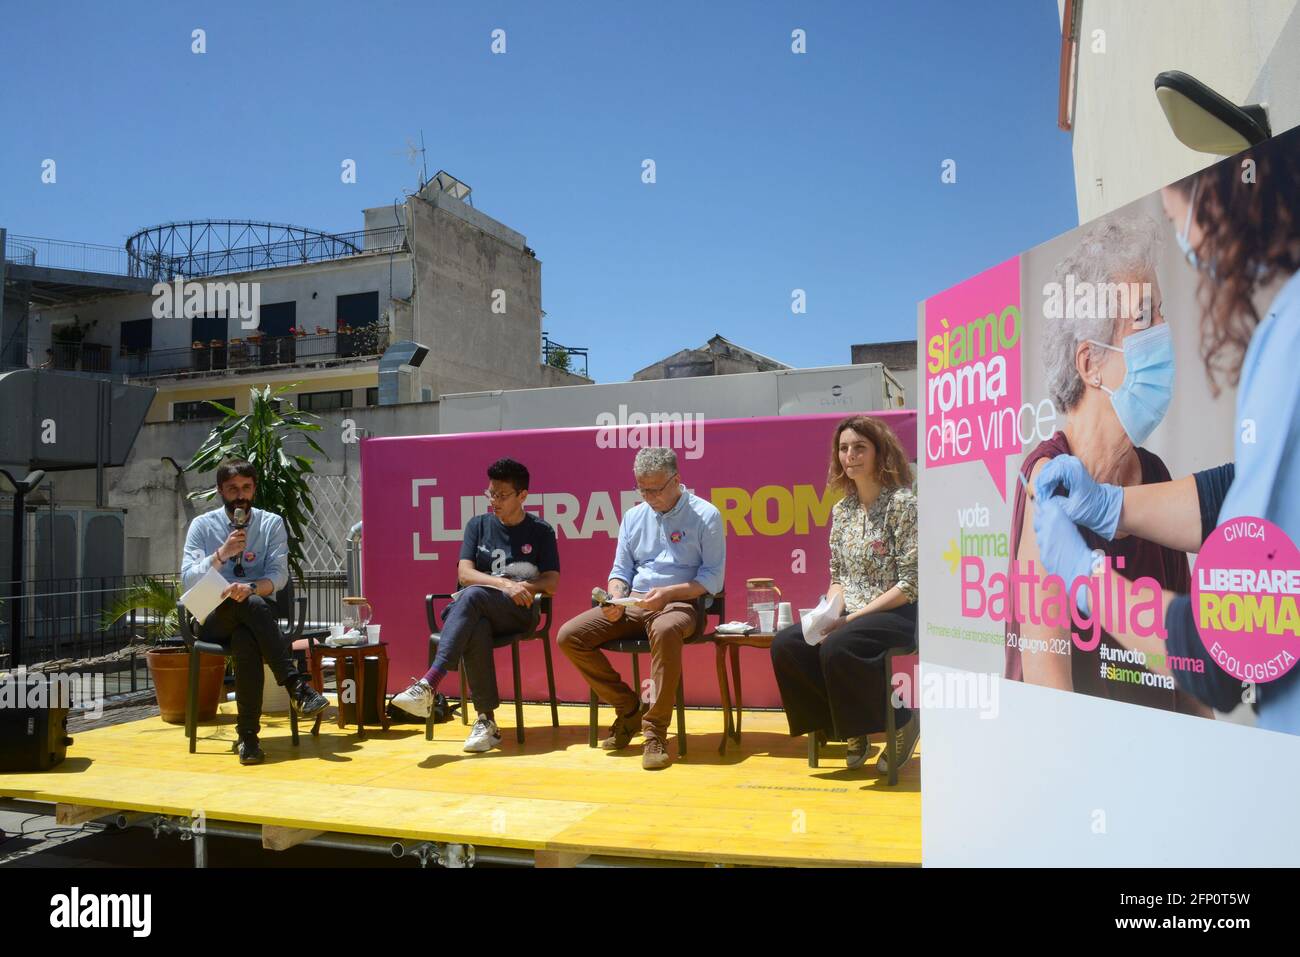 Rome, Italy. 20th May, 2021. From left to right: Amedeo Ciaccheri, Imma Battaglia, Massimiliano Smeriglio and Tatiana Marchisio Credit: Independent Photo Agency/Alamy Live News Stock Photo